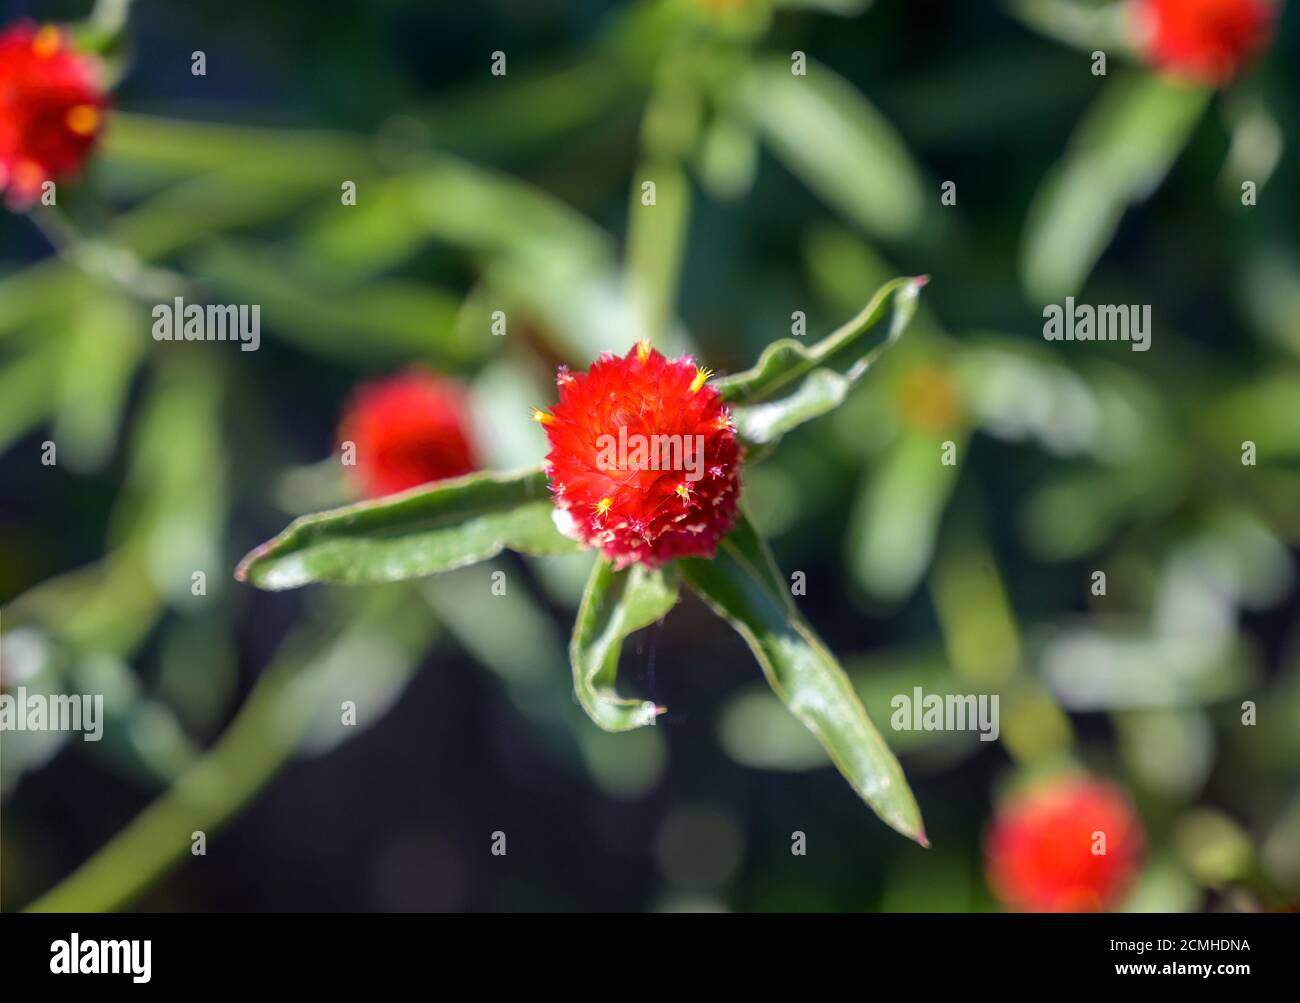 red blossom of the plant species called globe amaranth Stock Photo